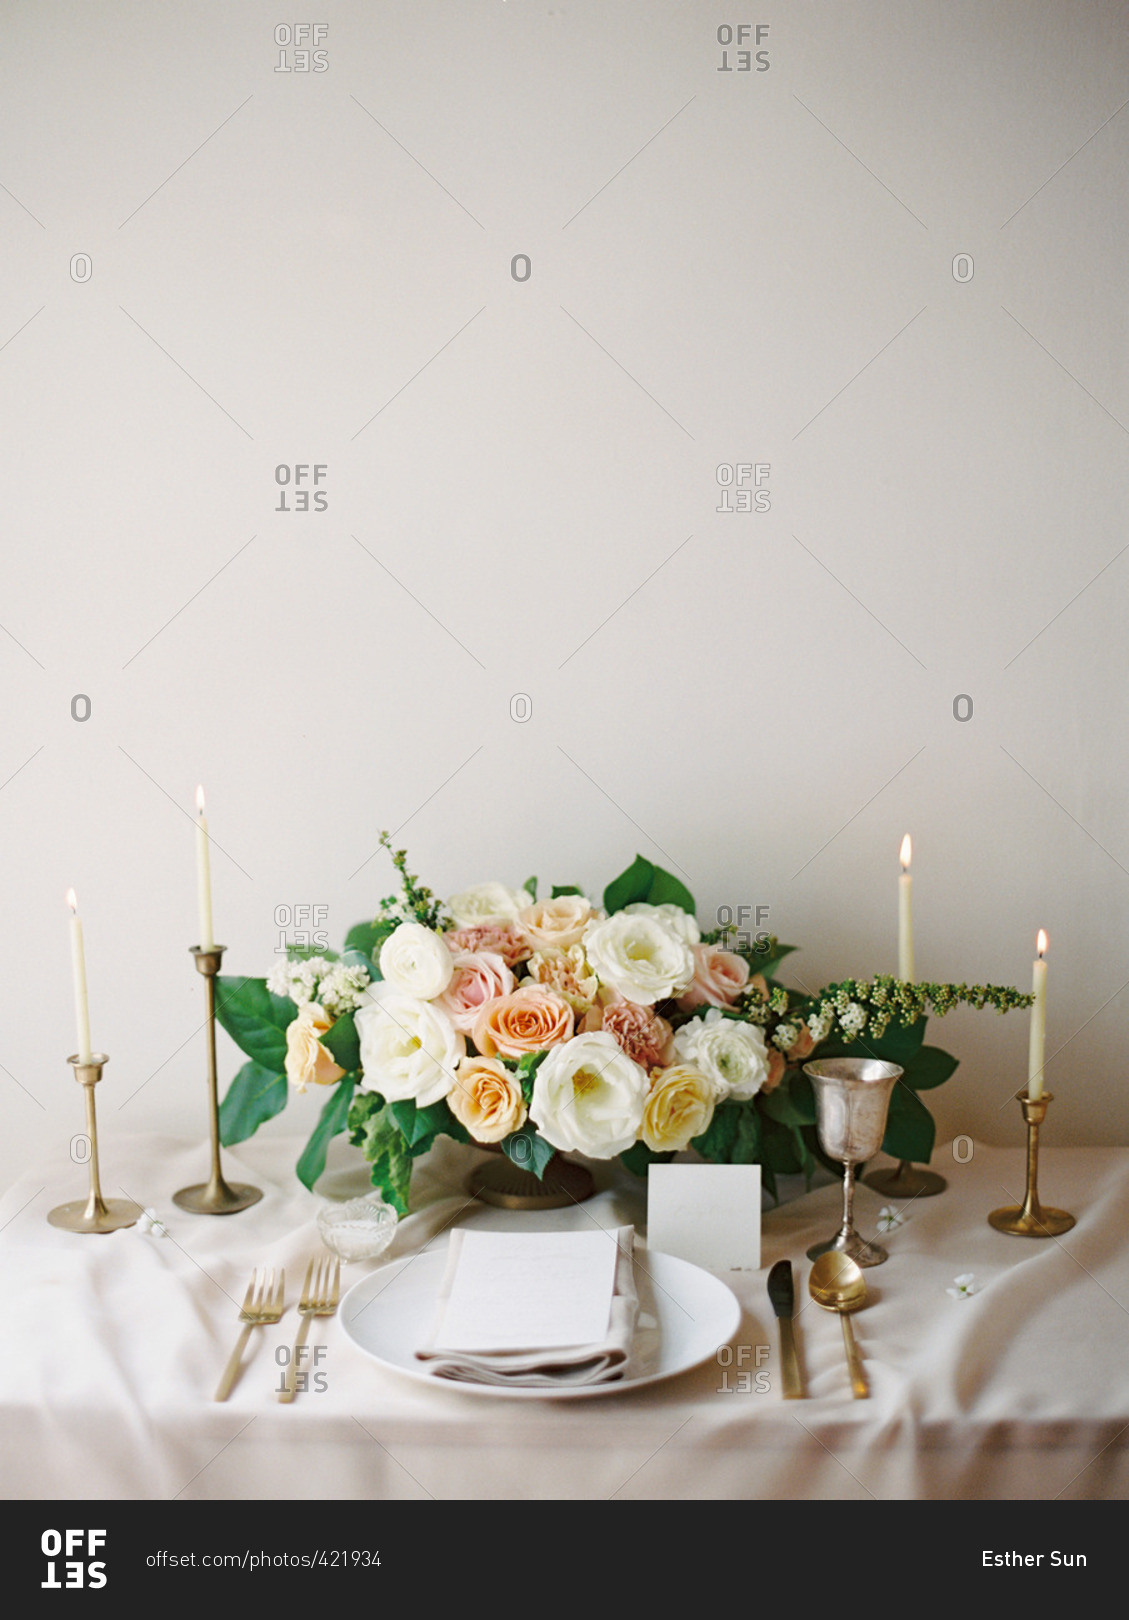 A table set with a bouquet of flowers, candles, plate and silverware